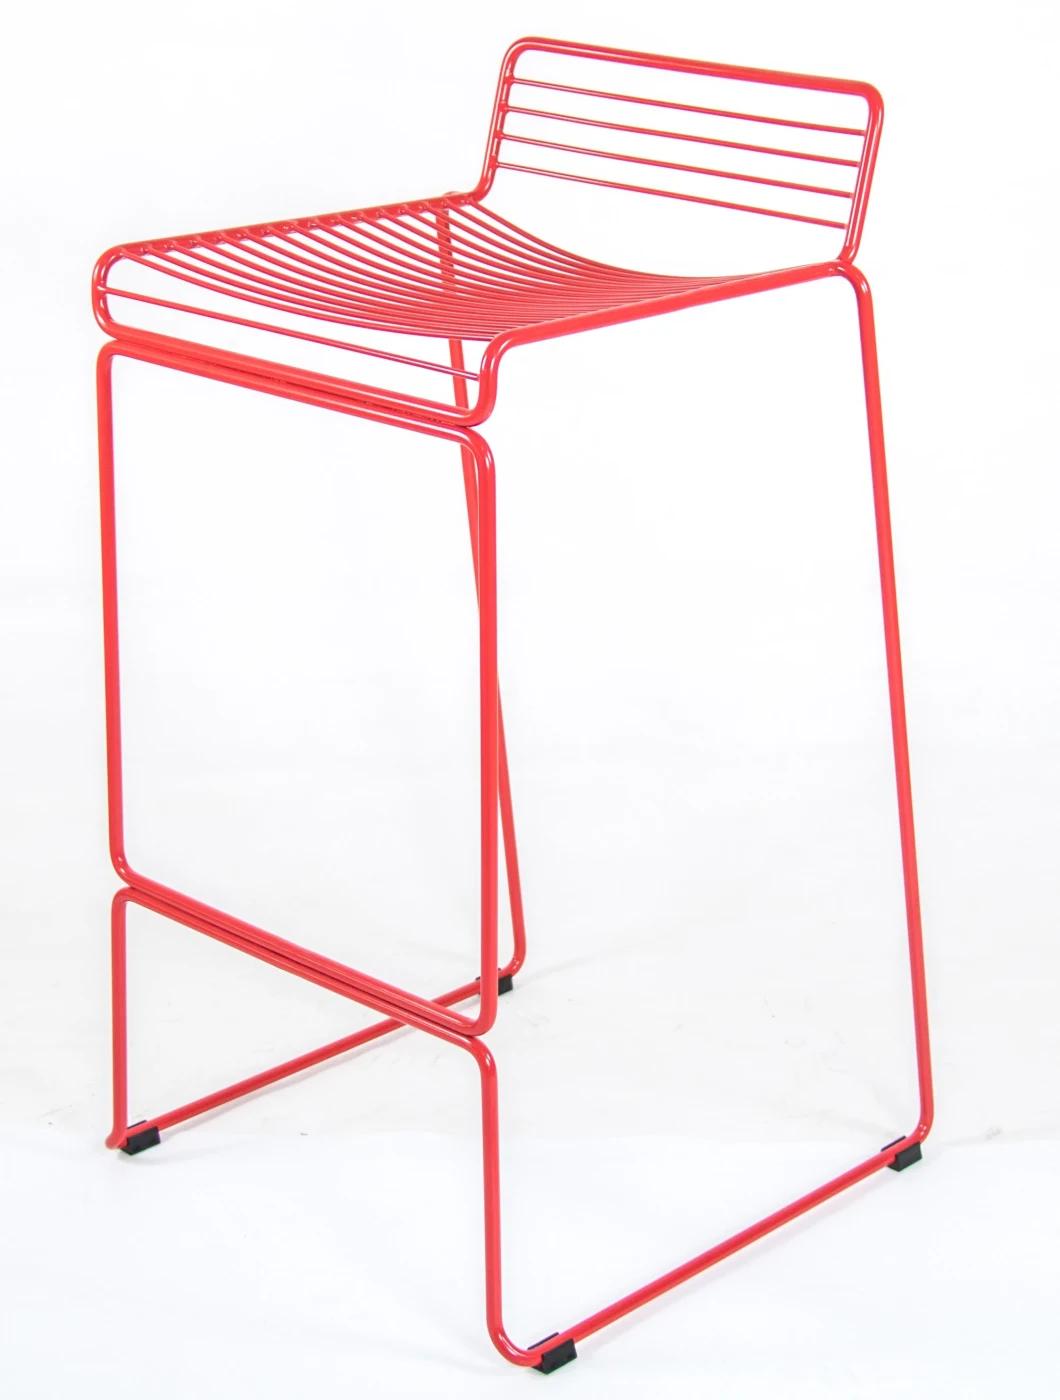 New Design Outdoor Anti UV Painting Wire High Stool Chair